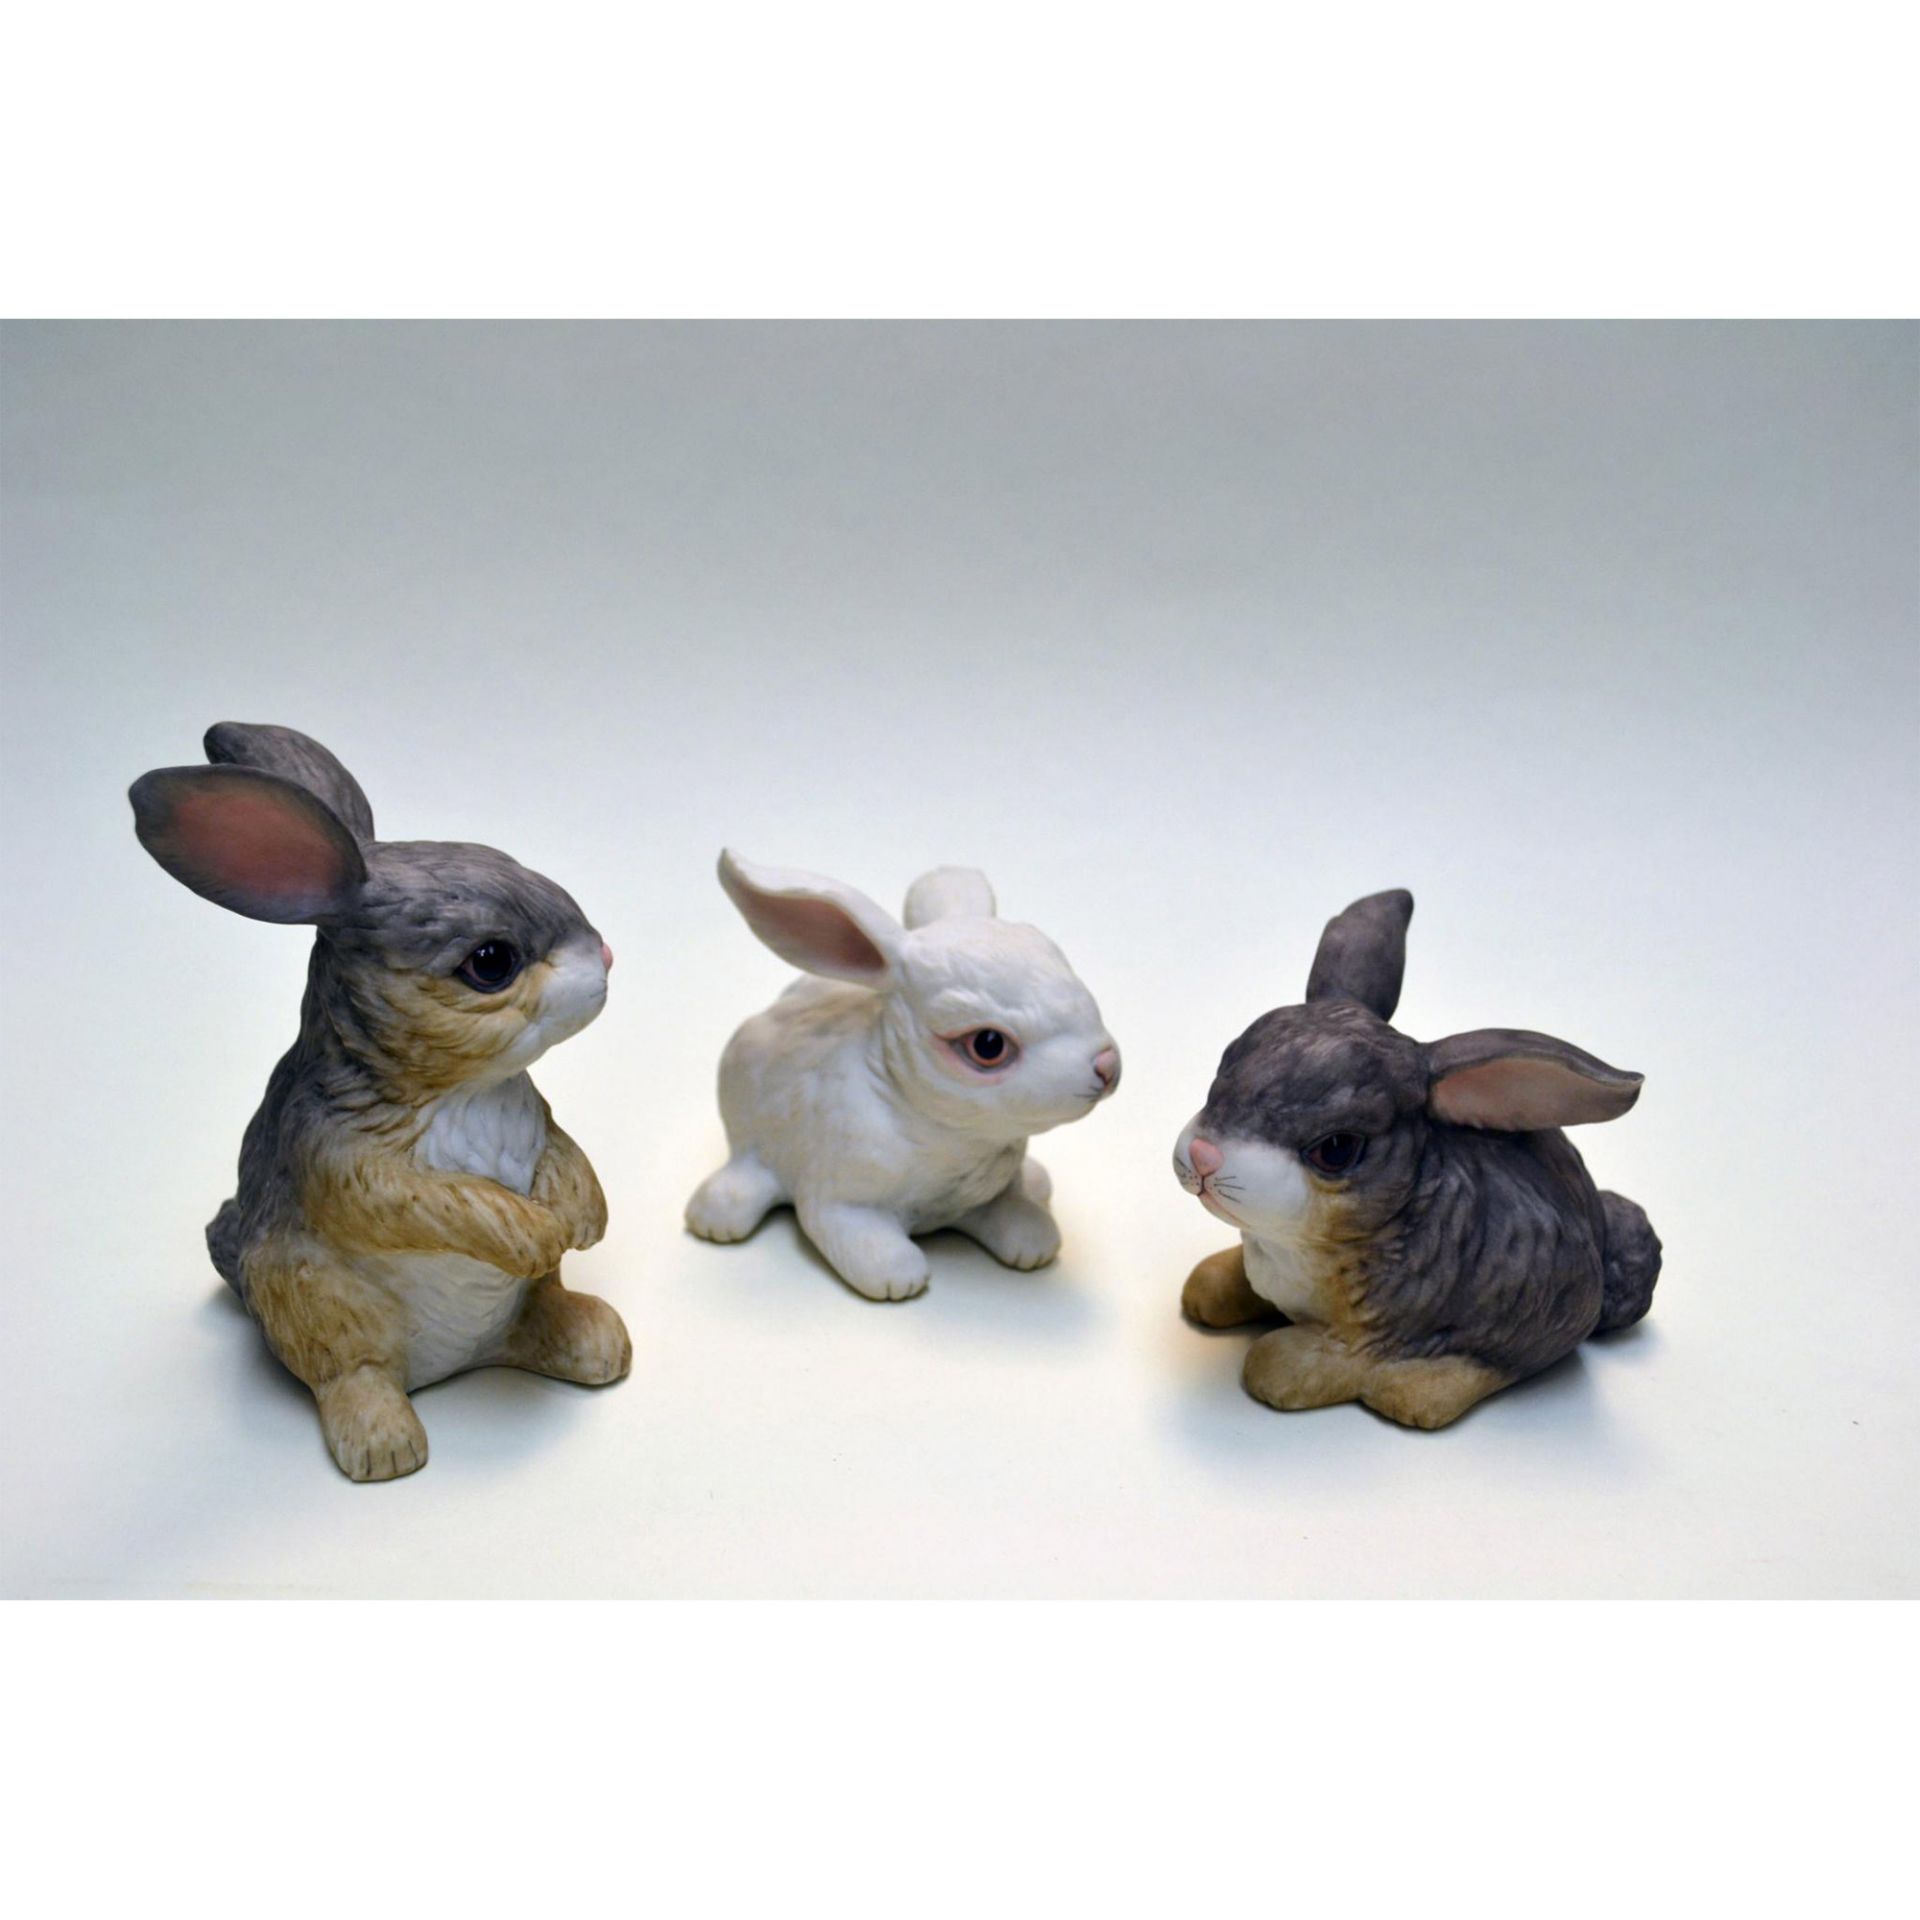 Boehm Porcelain Rabbits, Sitting And At Rest, White & Wild Figurines, 3 Pcs